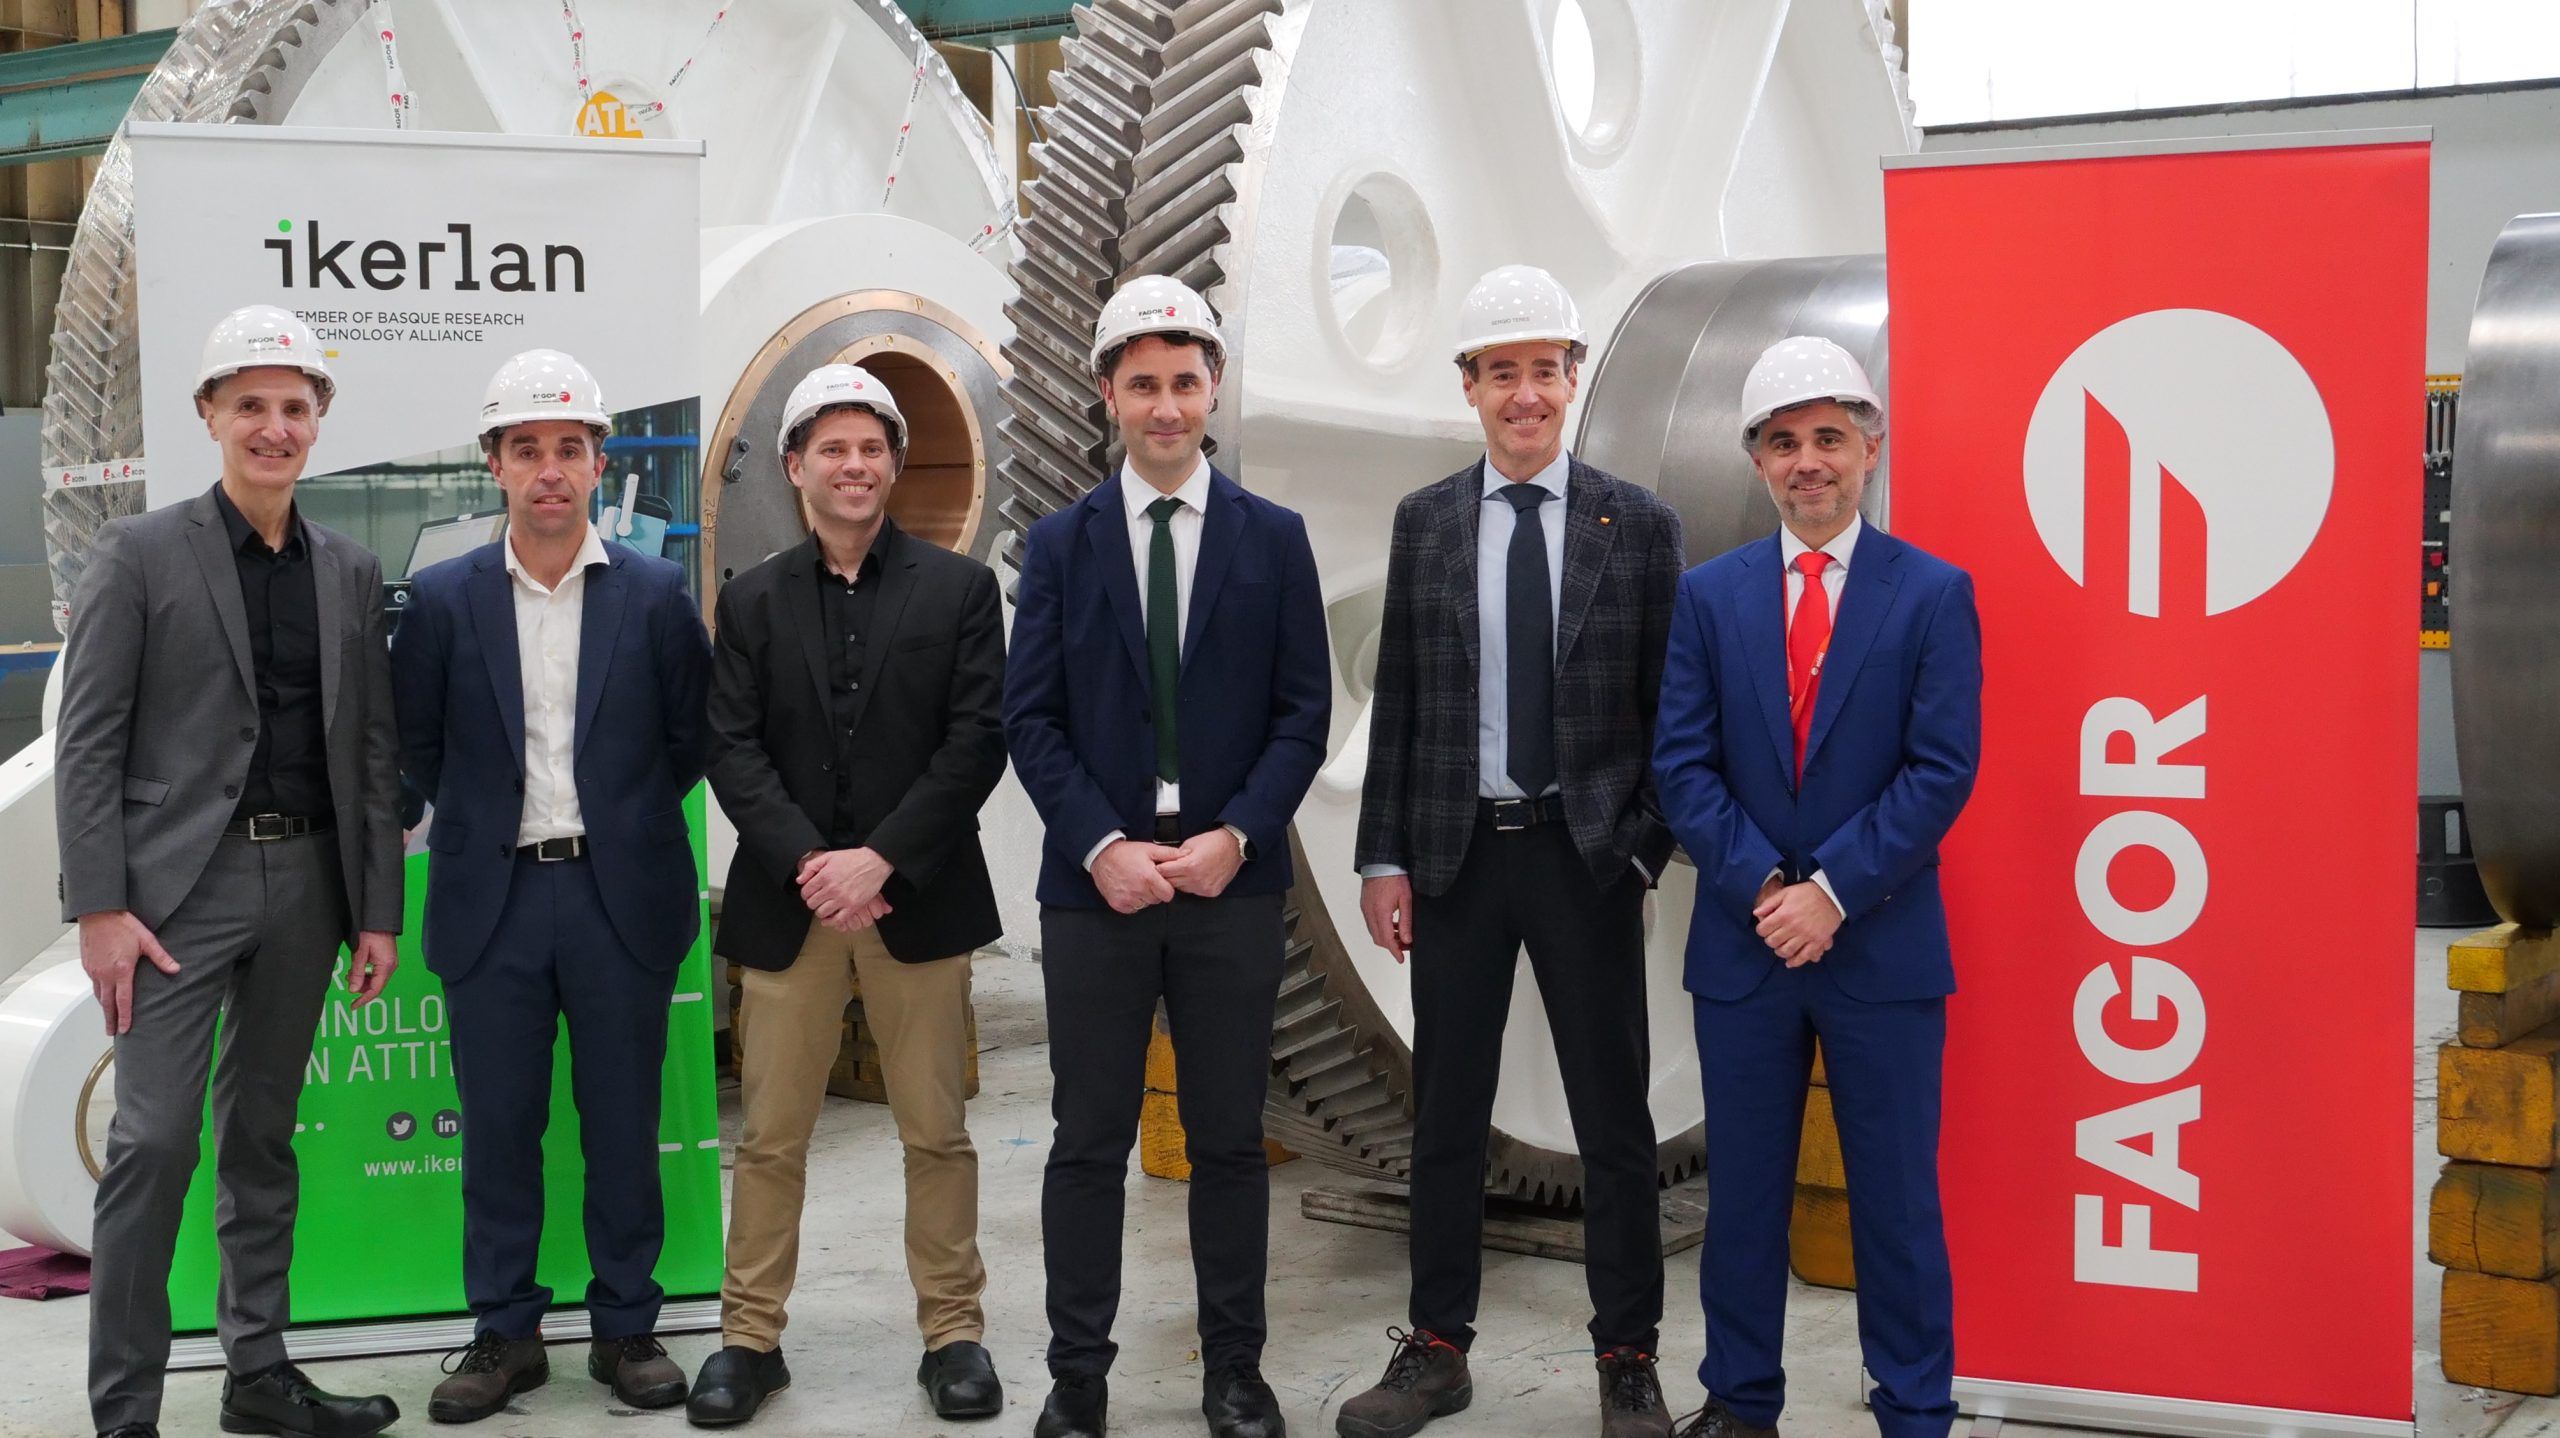 Fagor Arrasate event: FAGOR ARRASATE and KONIKER reinforce their collaboration with IKERLAN to develop and implement intelligent technologies in their production process